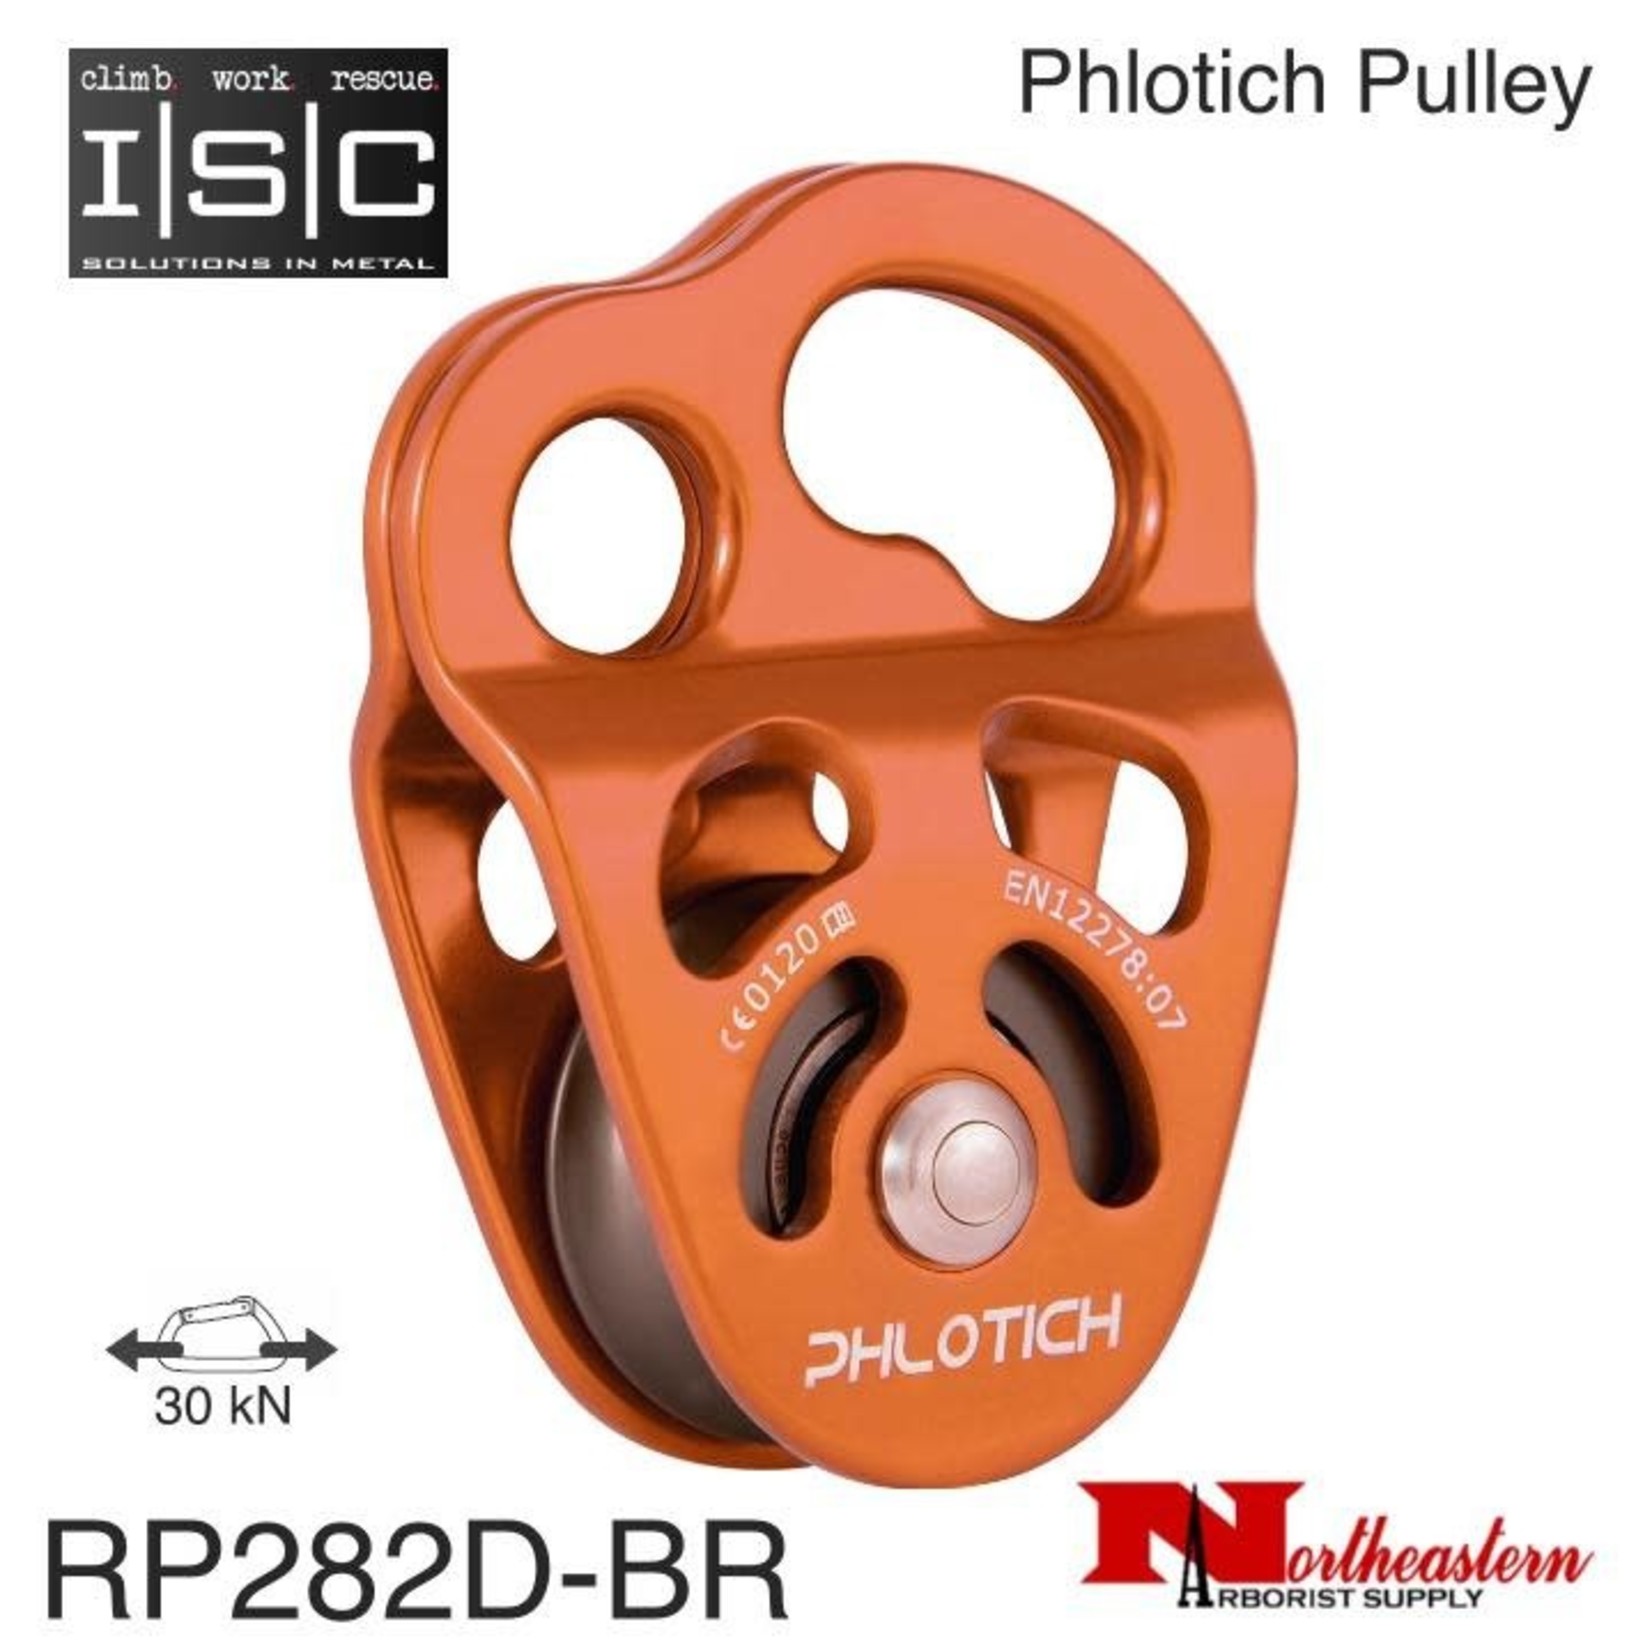 ISC Pulley Phlotich Orange With Bearings 30kN 1/2" Rope Max.